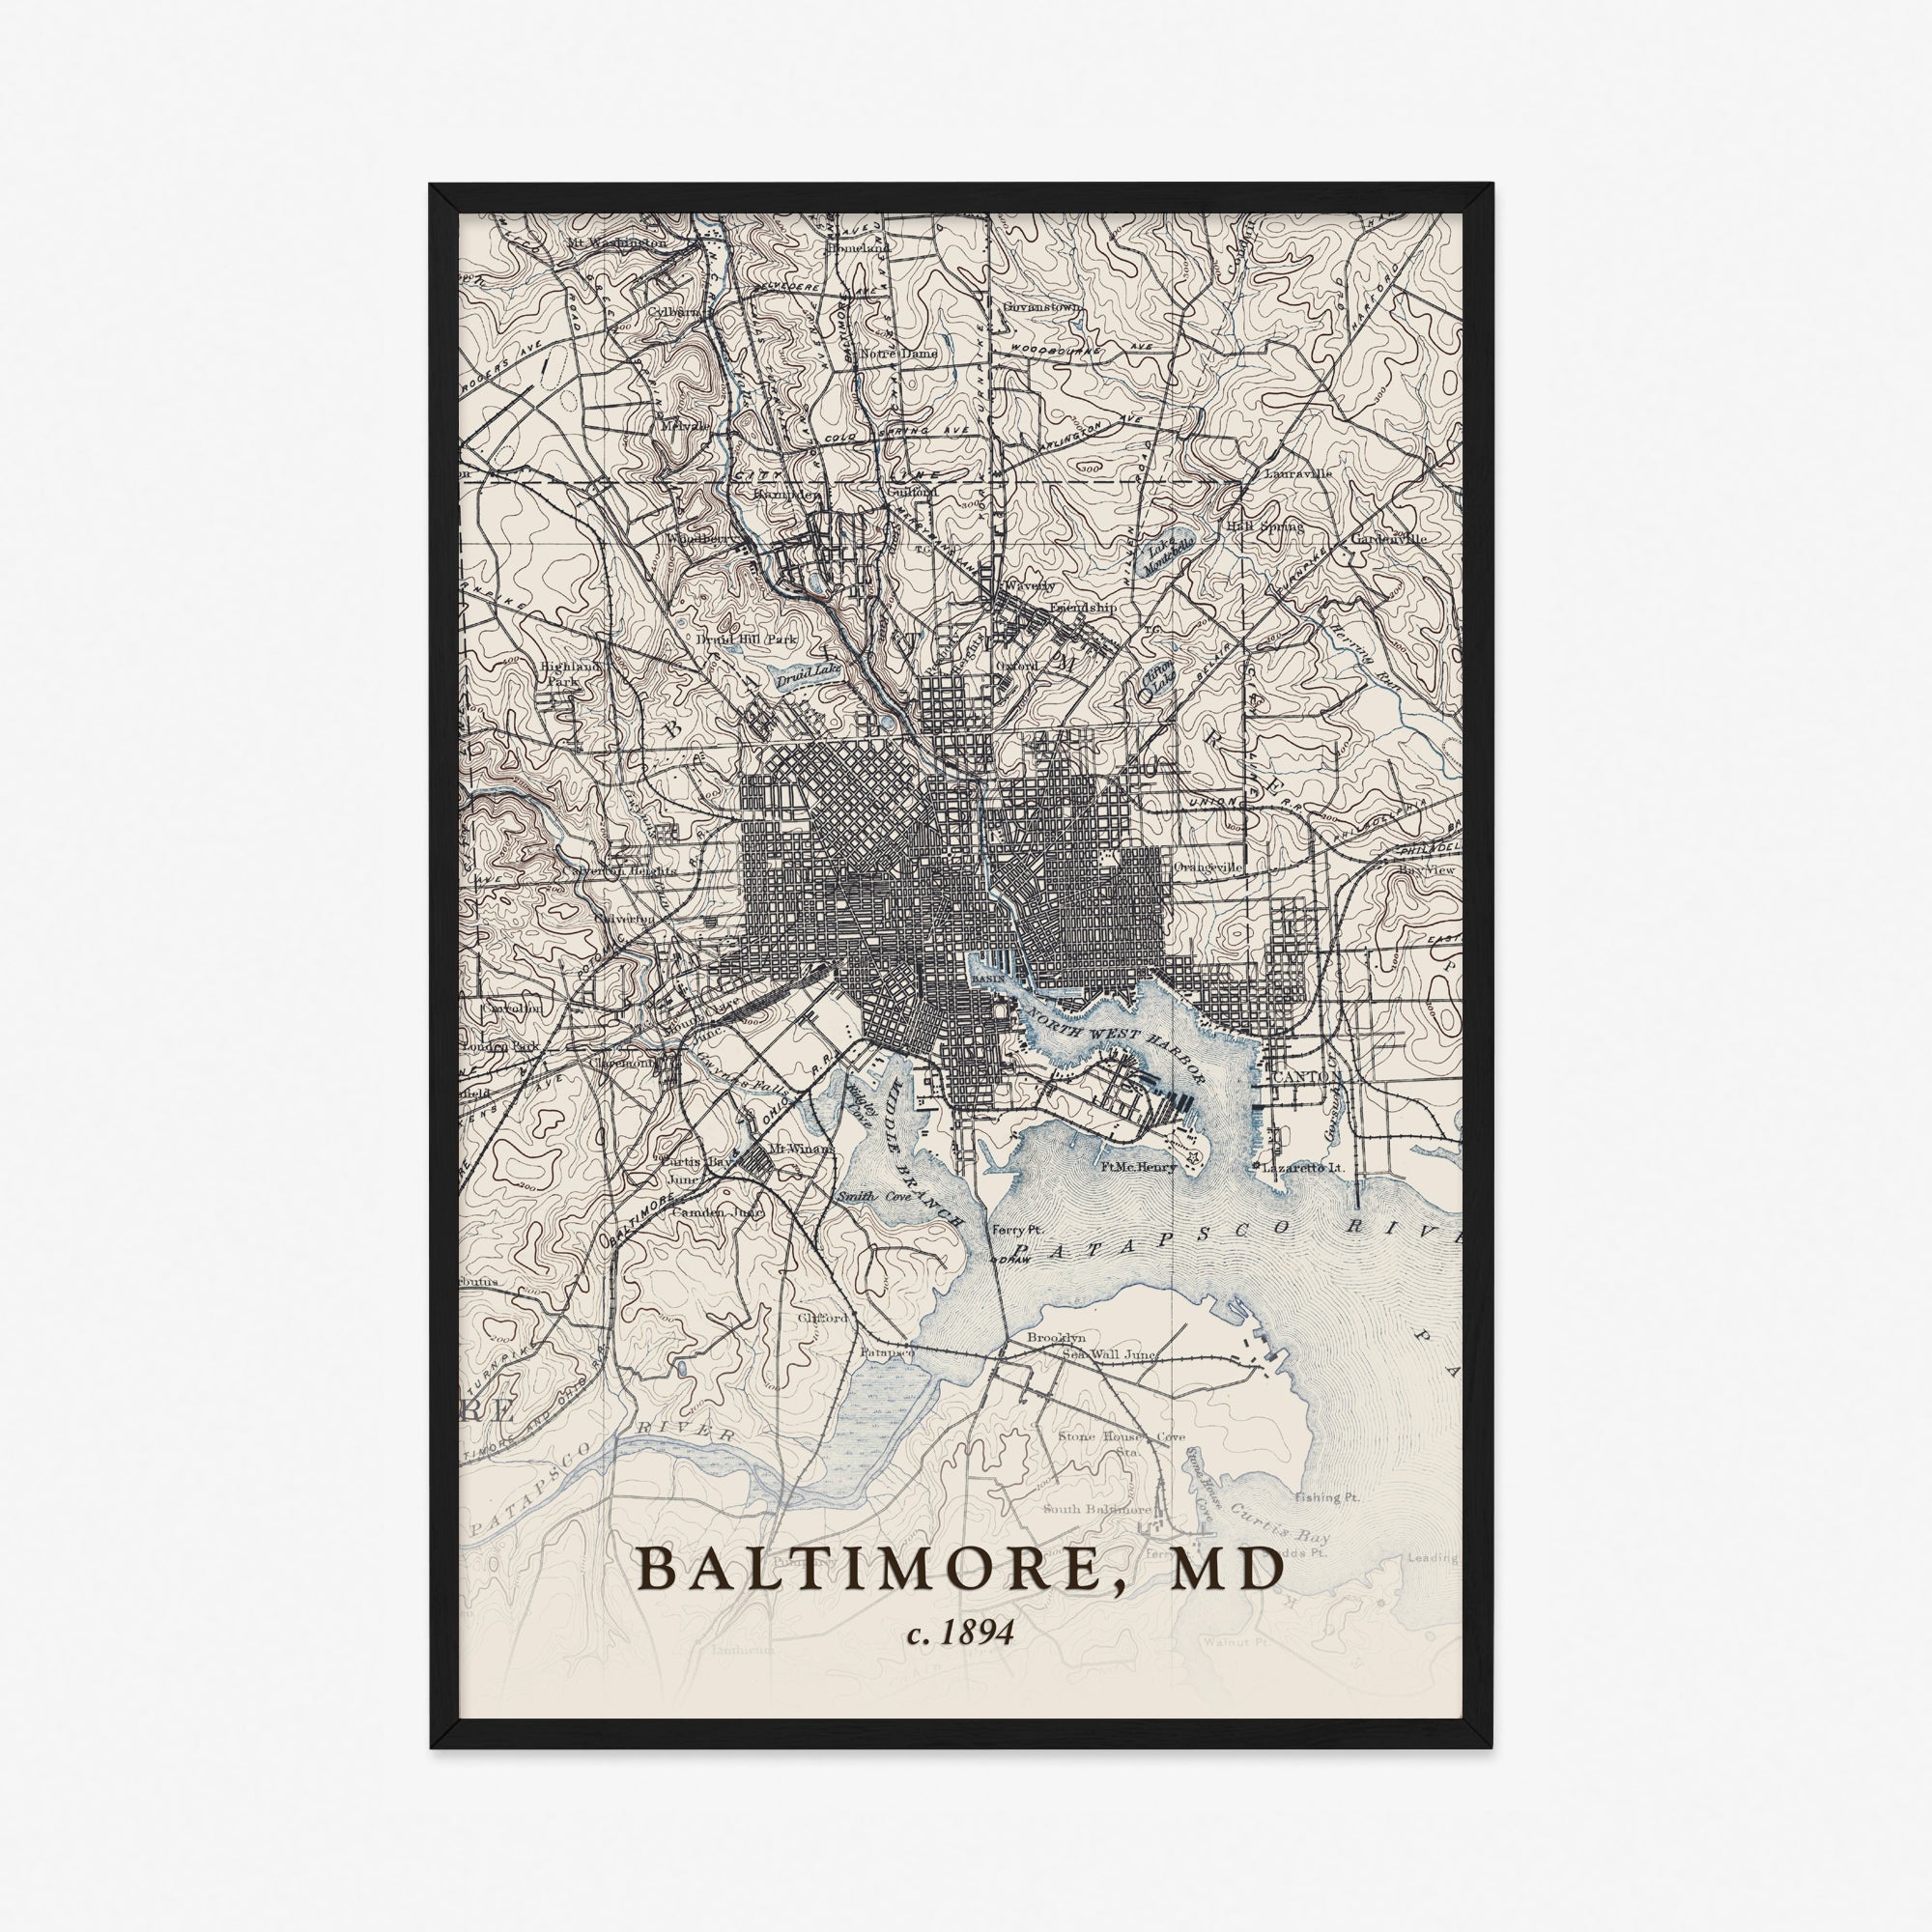 Baltimore, MD - 1894 Topographic Map